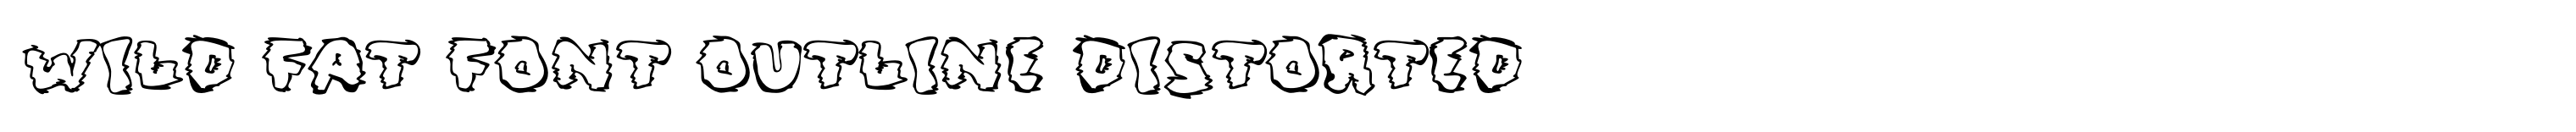 Wild Fat Font Outline Distorted